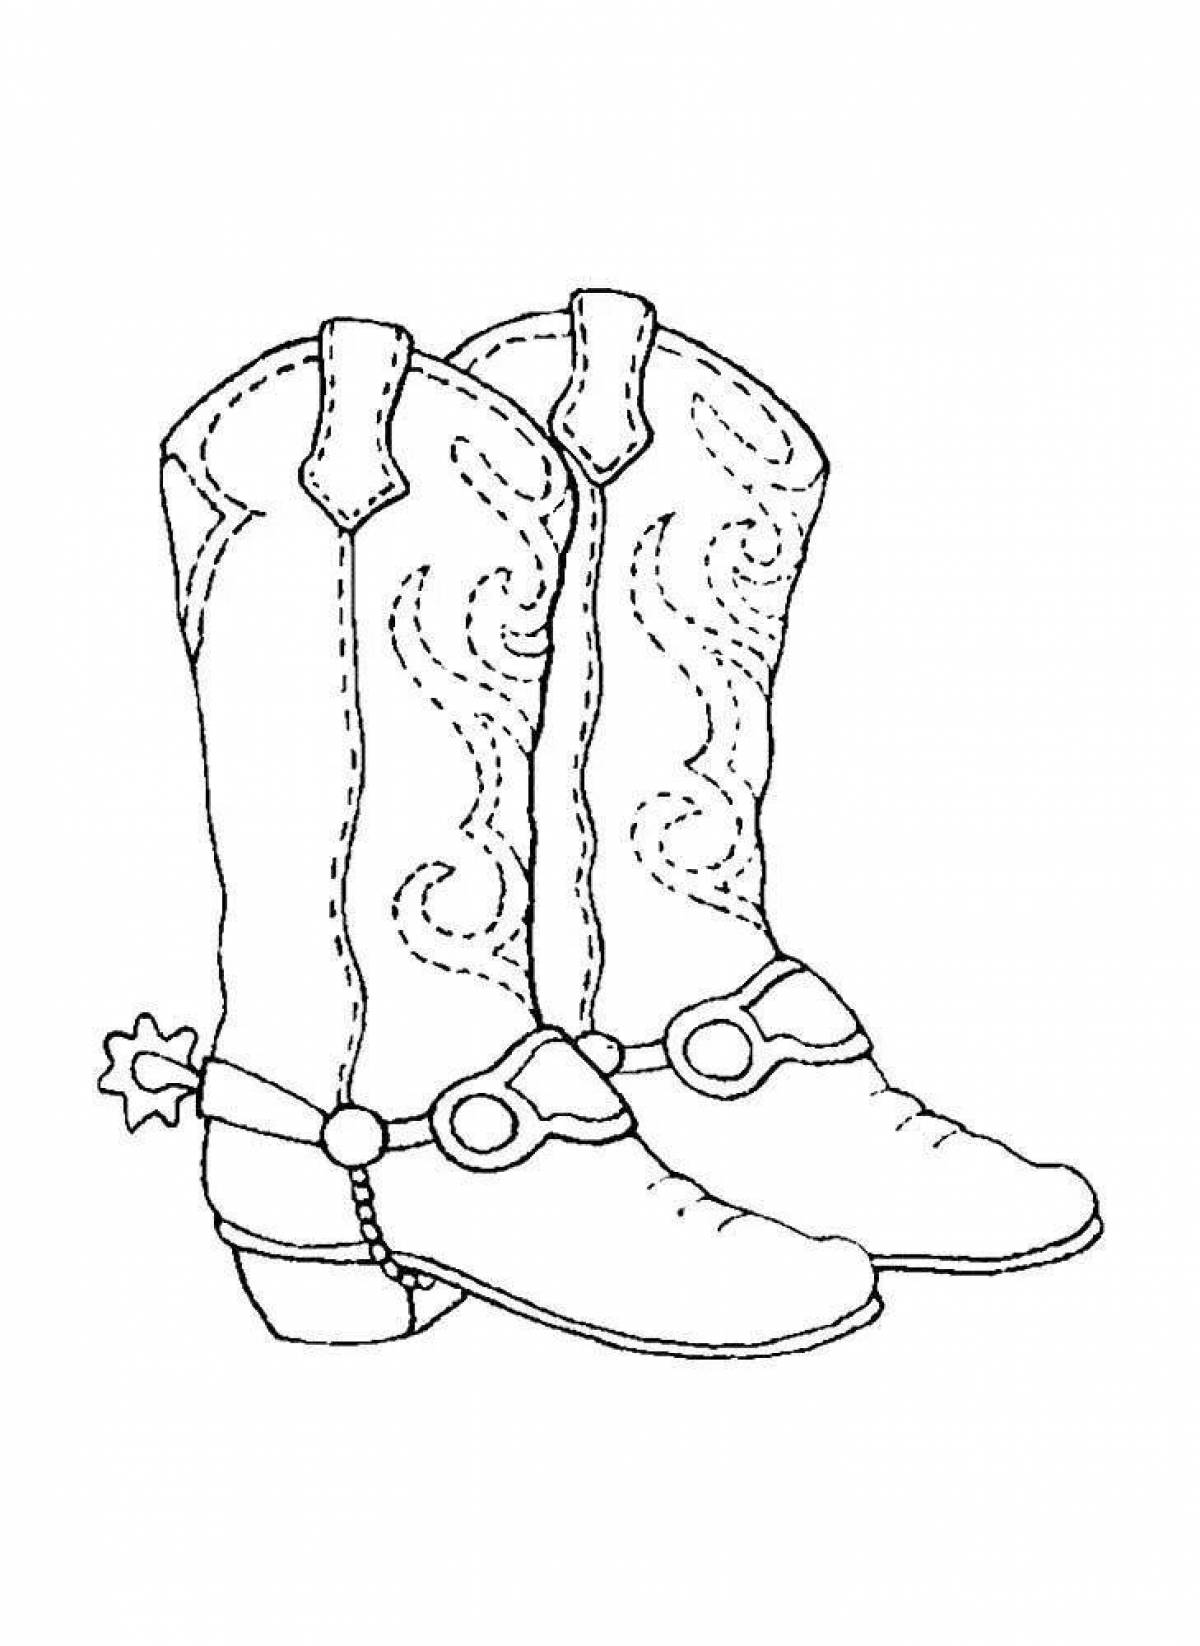 Exquisite shoes coloring page